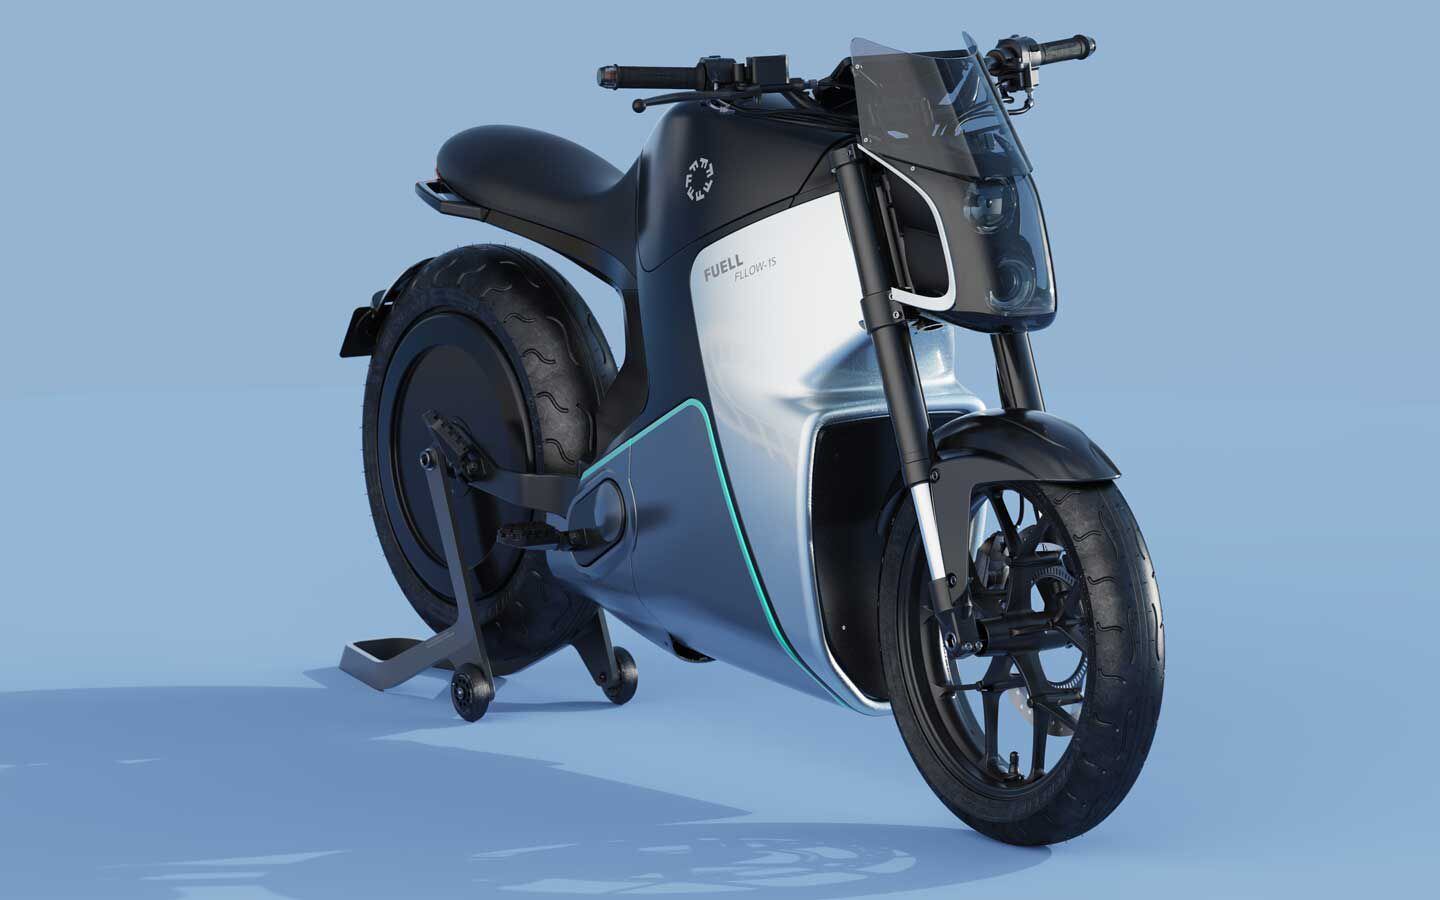 The Fllow’s 10kWh battery pack gets its own structural magnesium housing down below. The brand calls the bike’s styling “minimalistic, and utilitarian,” but maybe “polarizing” is more accurate.